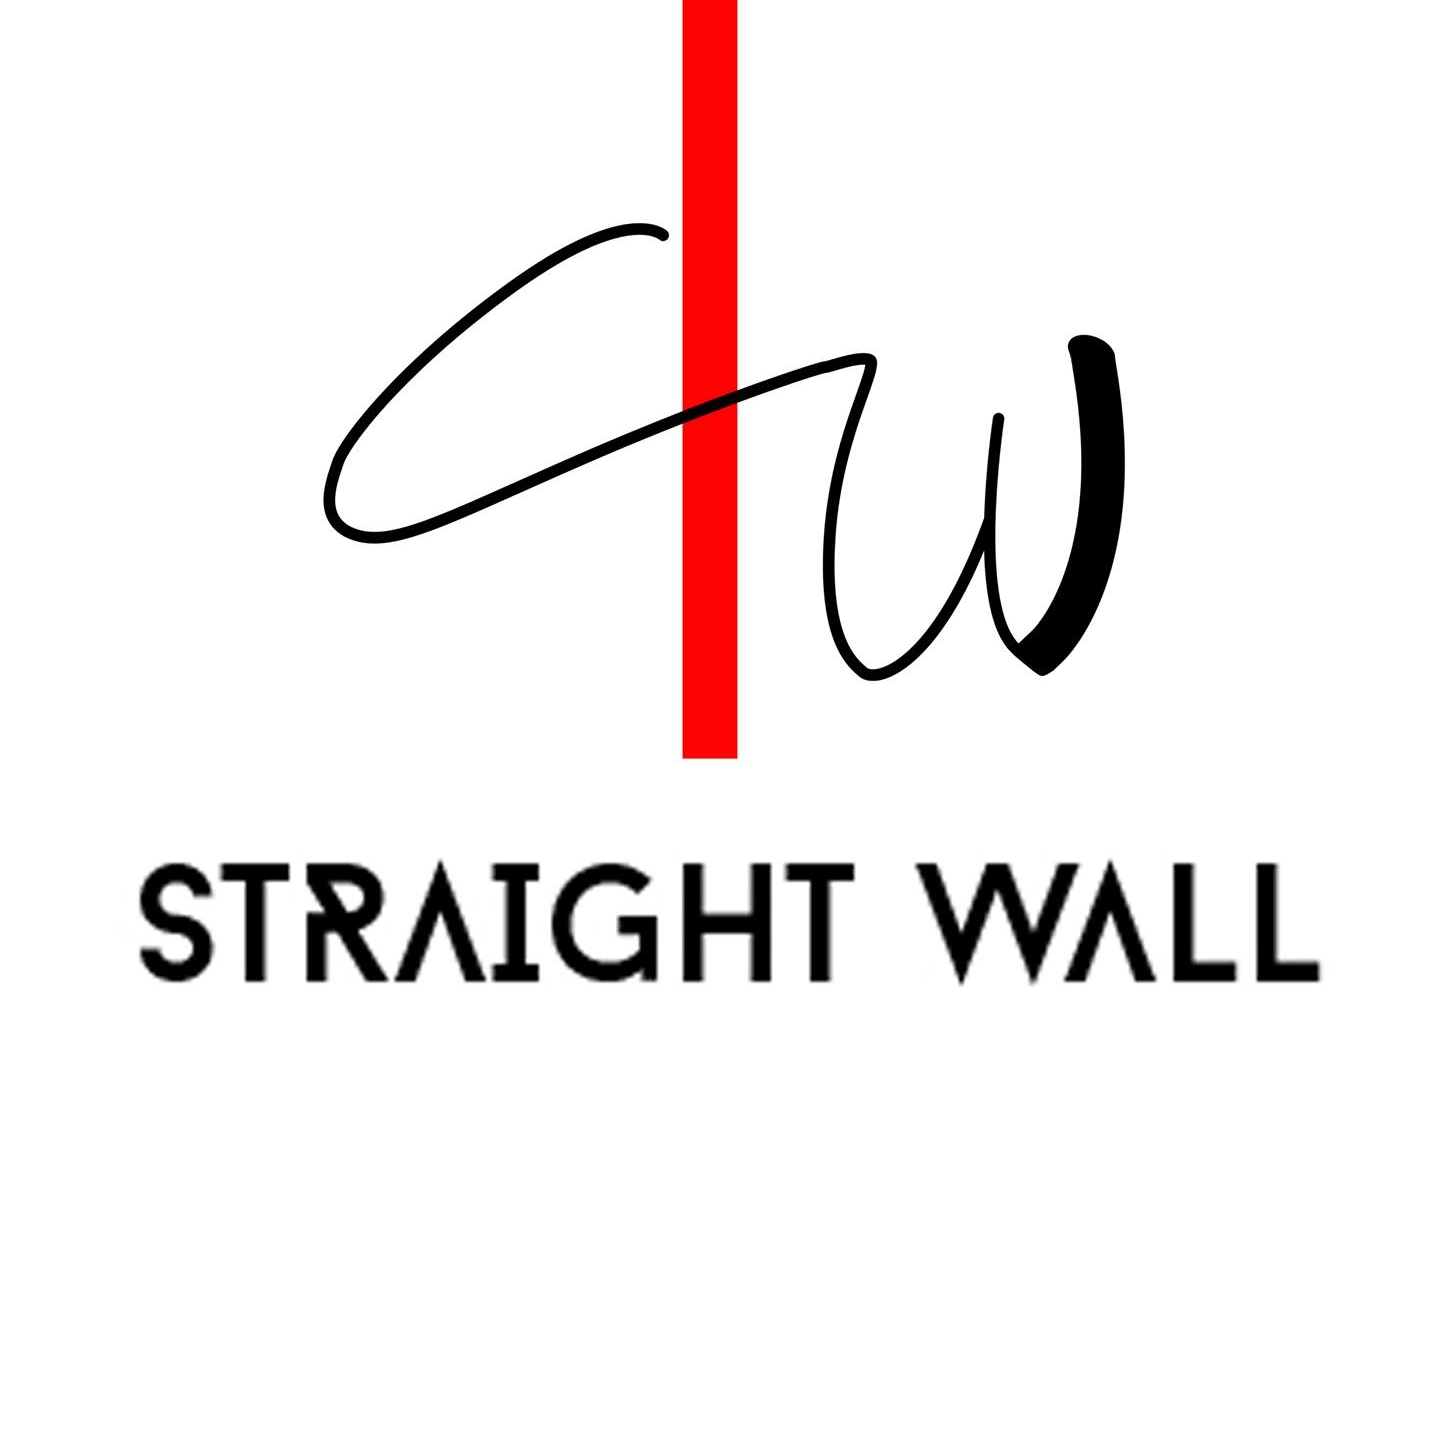 Straightwall Architects|Legal Services|Professional Services